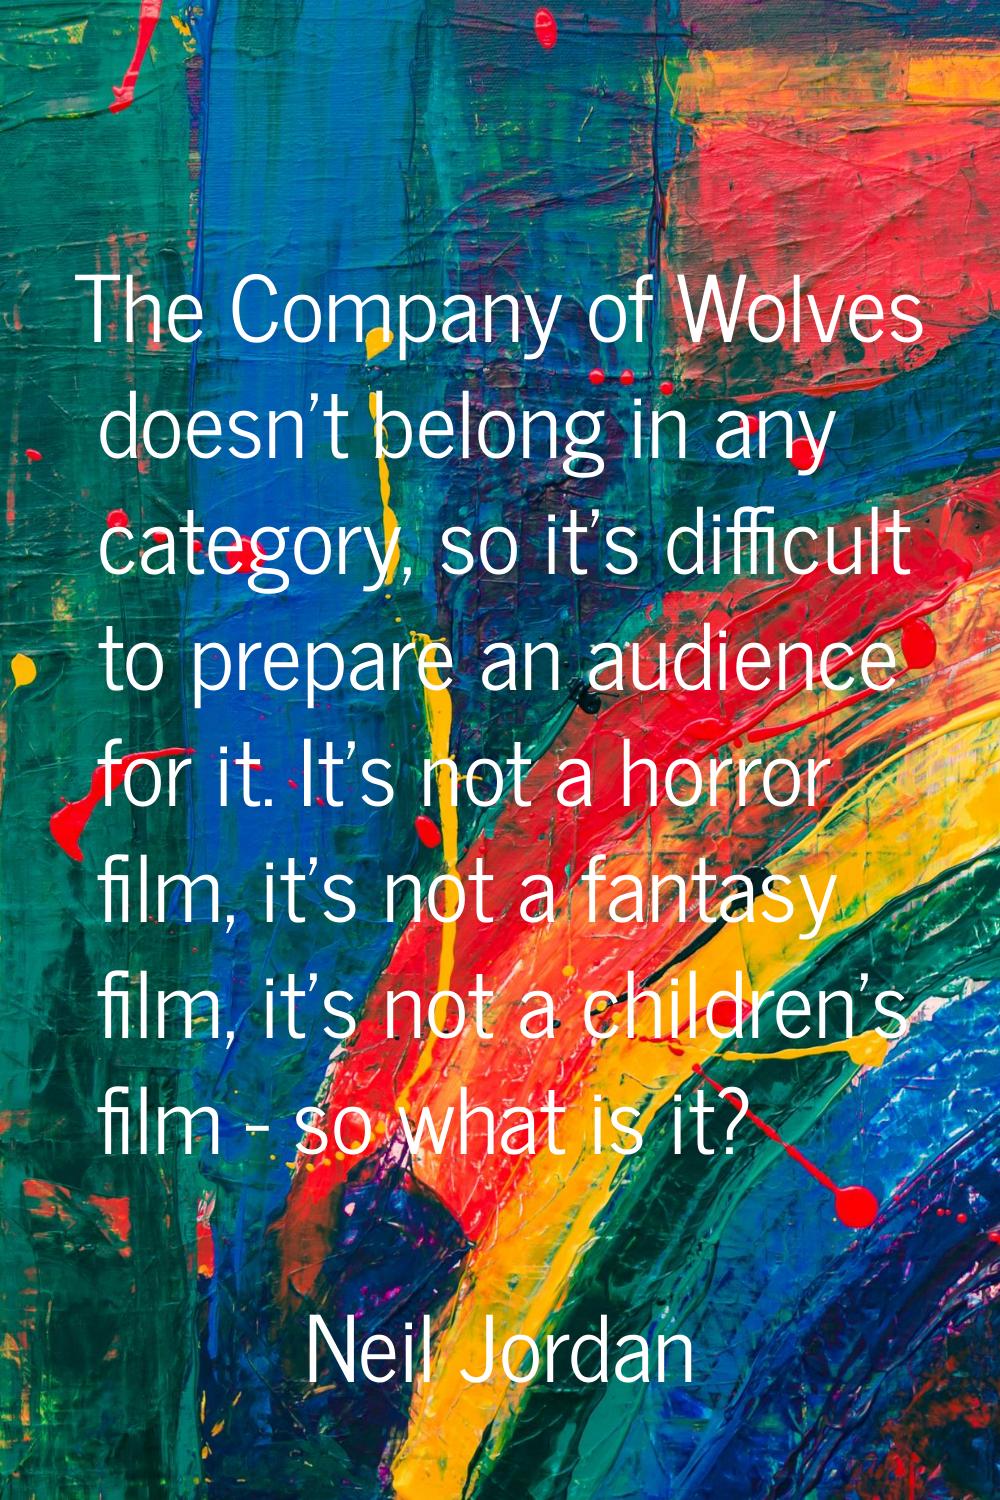 The Company of Wolves doesn't belong in any category, so it's difficult to prepare an audience for 